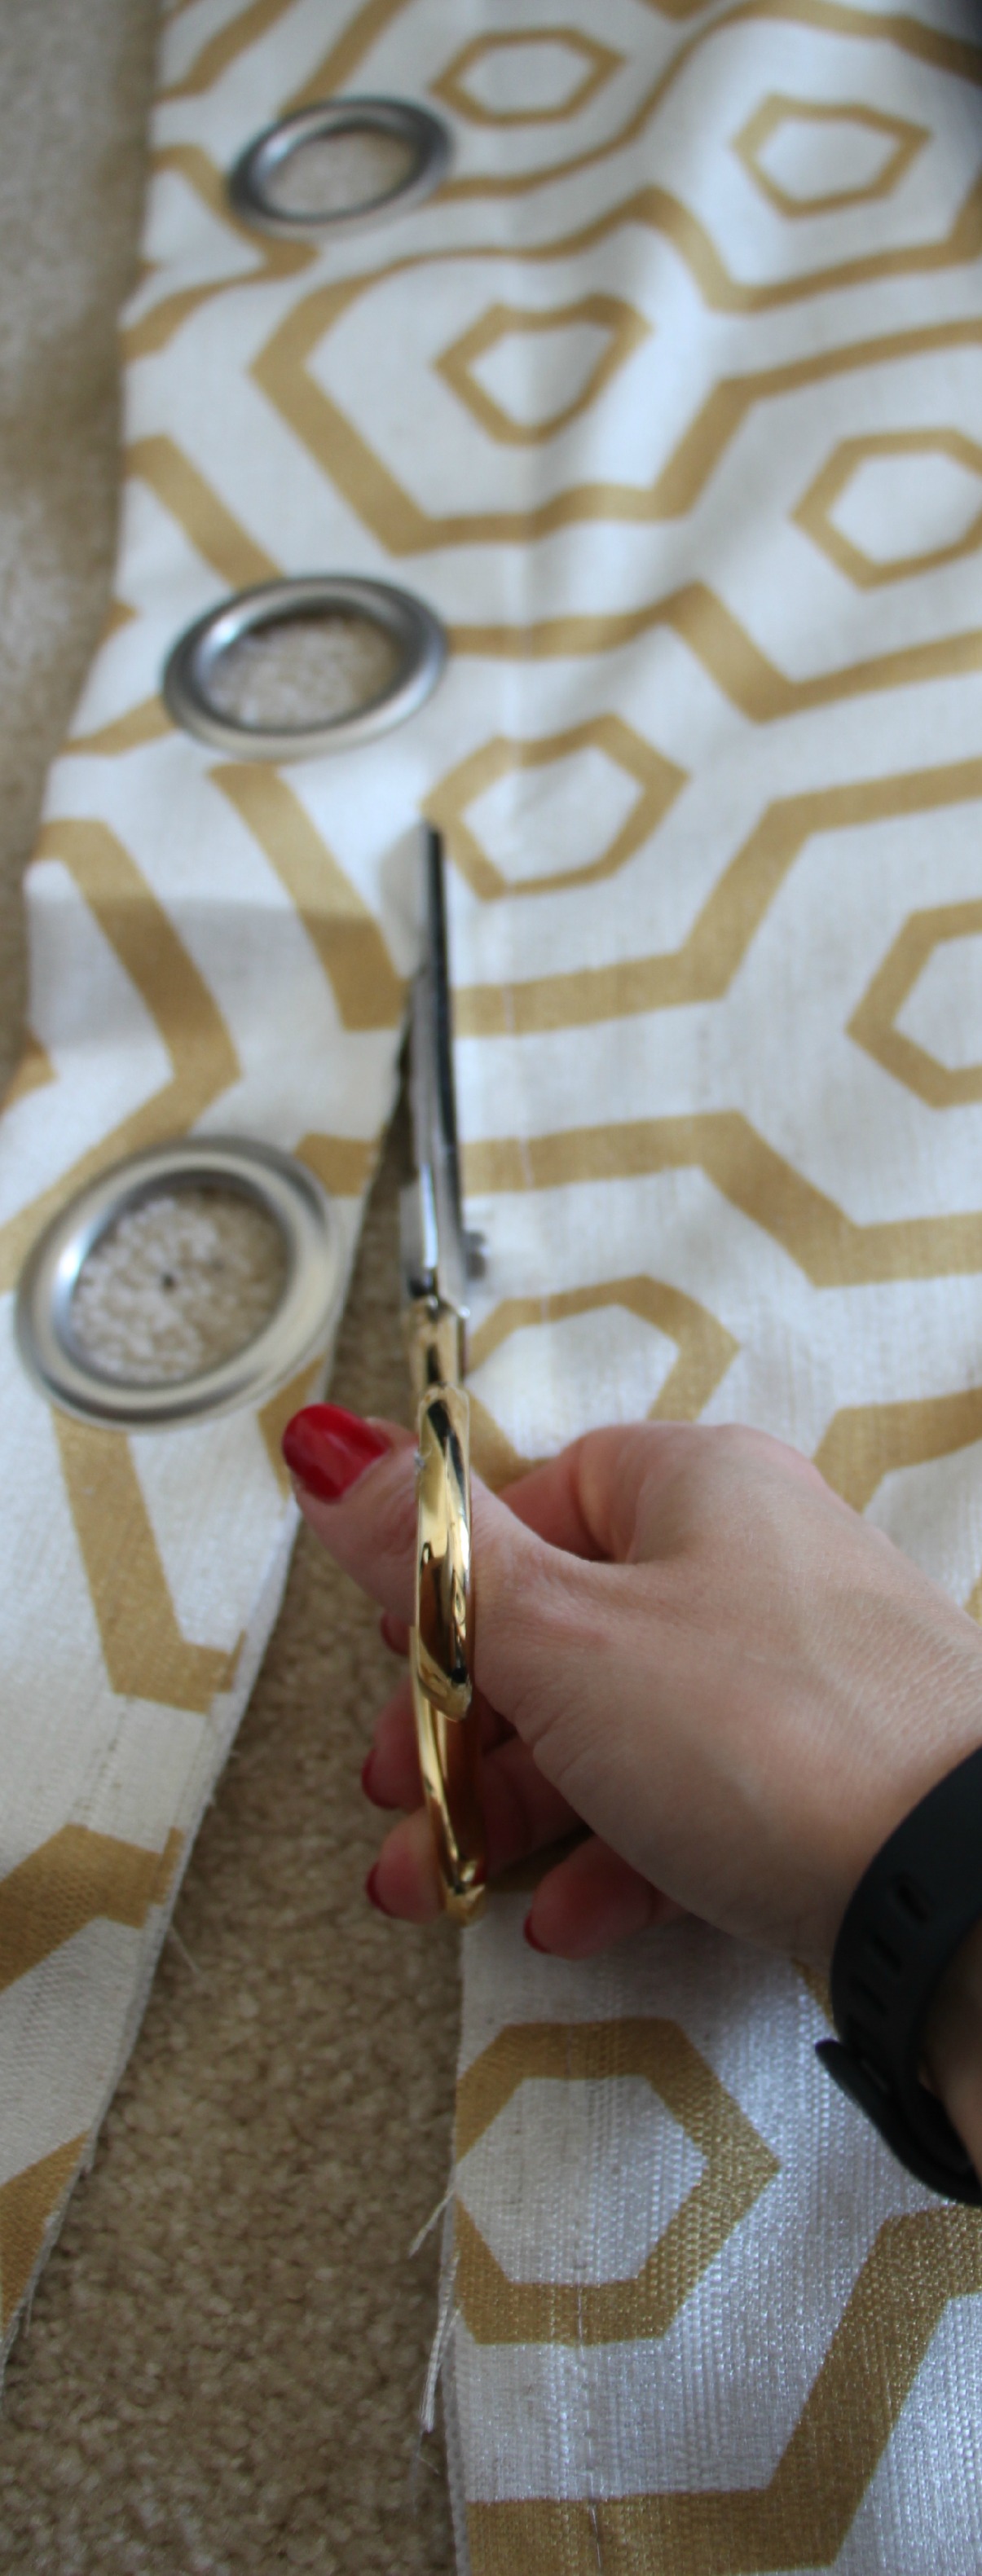 how to reupholster a headboard with a curtain panel - cutting grommets off - this is our bliss